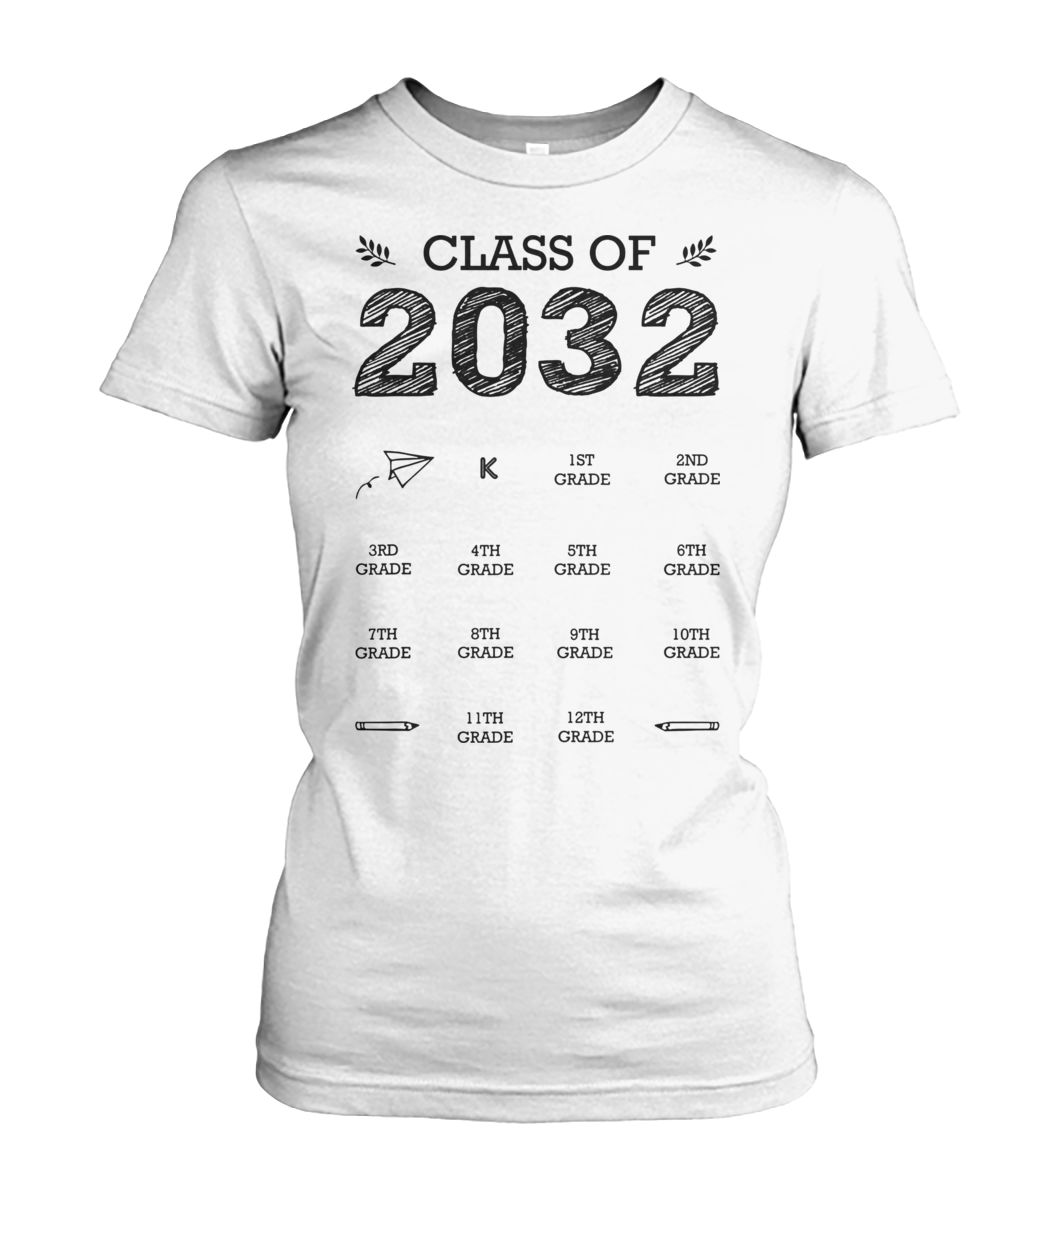 Class of 2032 grow with me with space for check marks women's crew tee